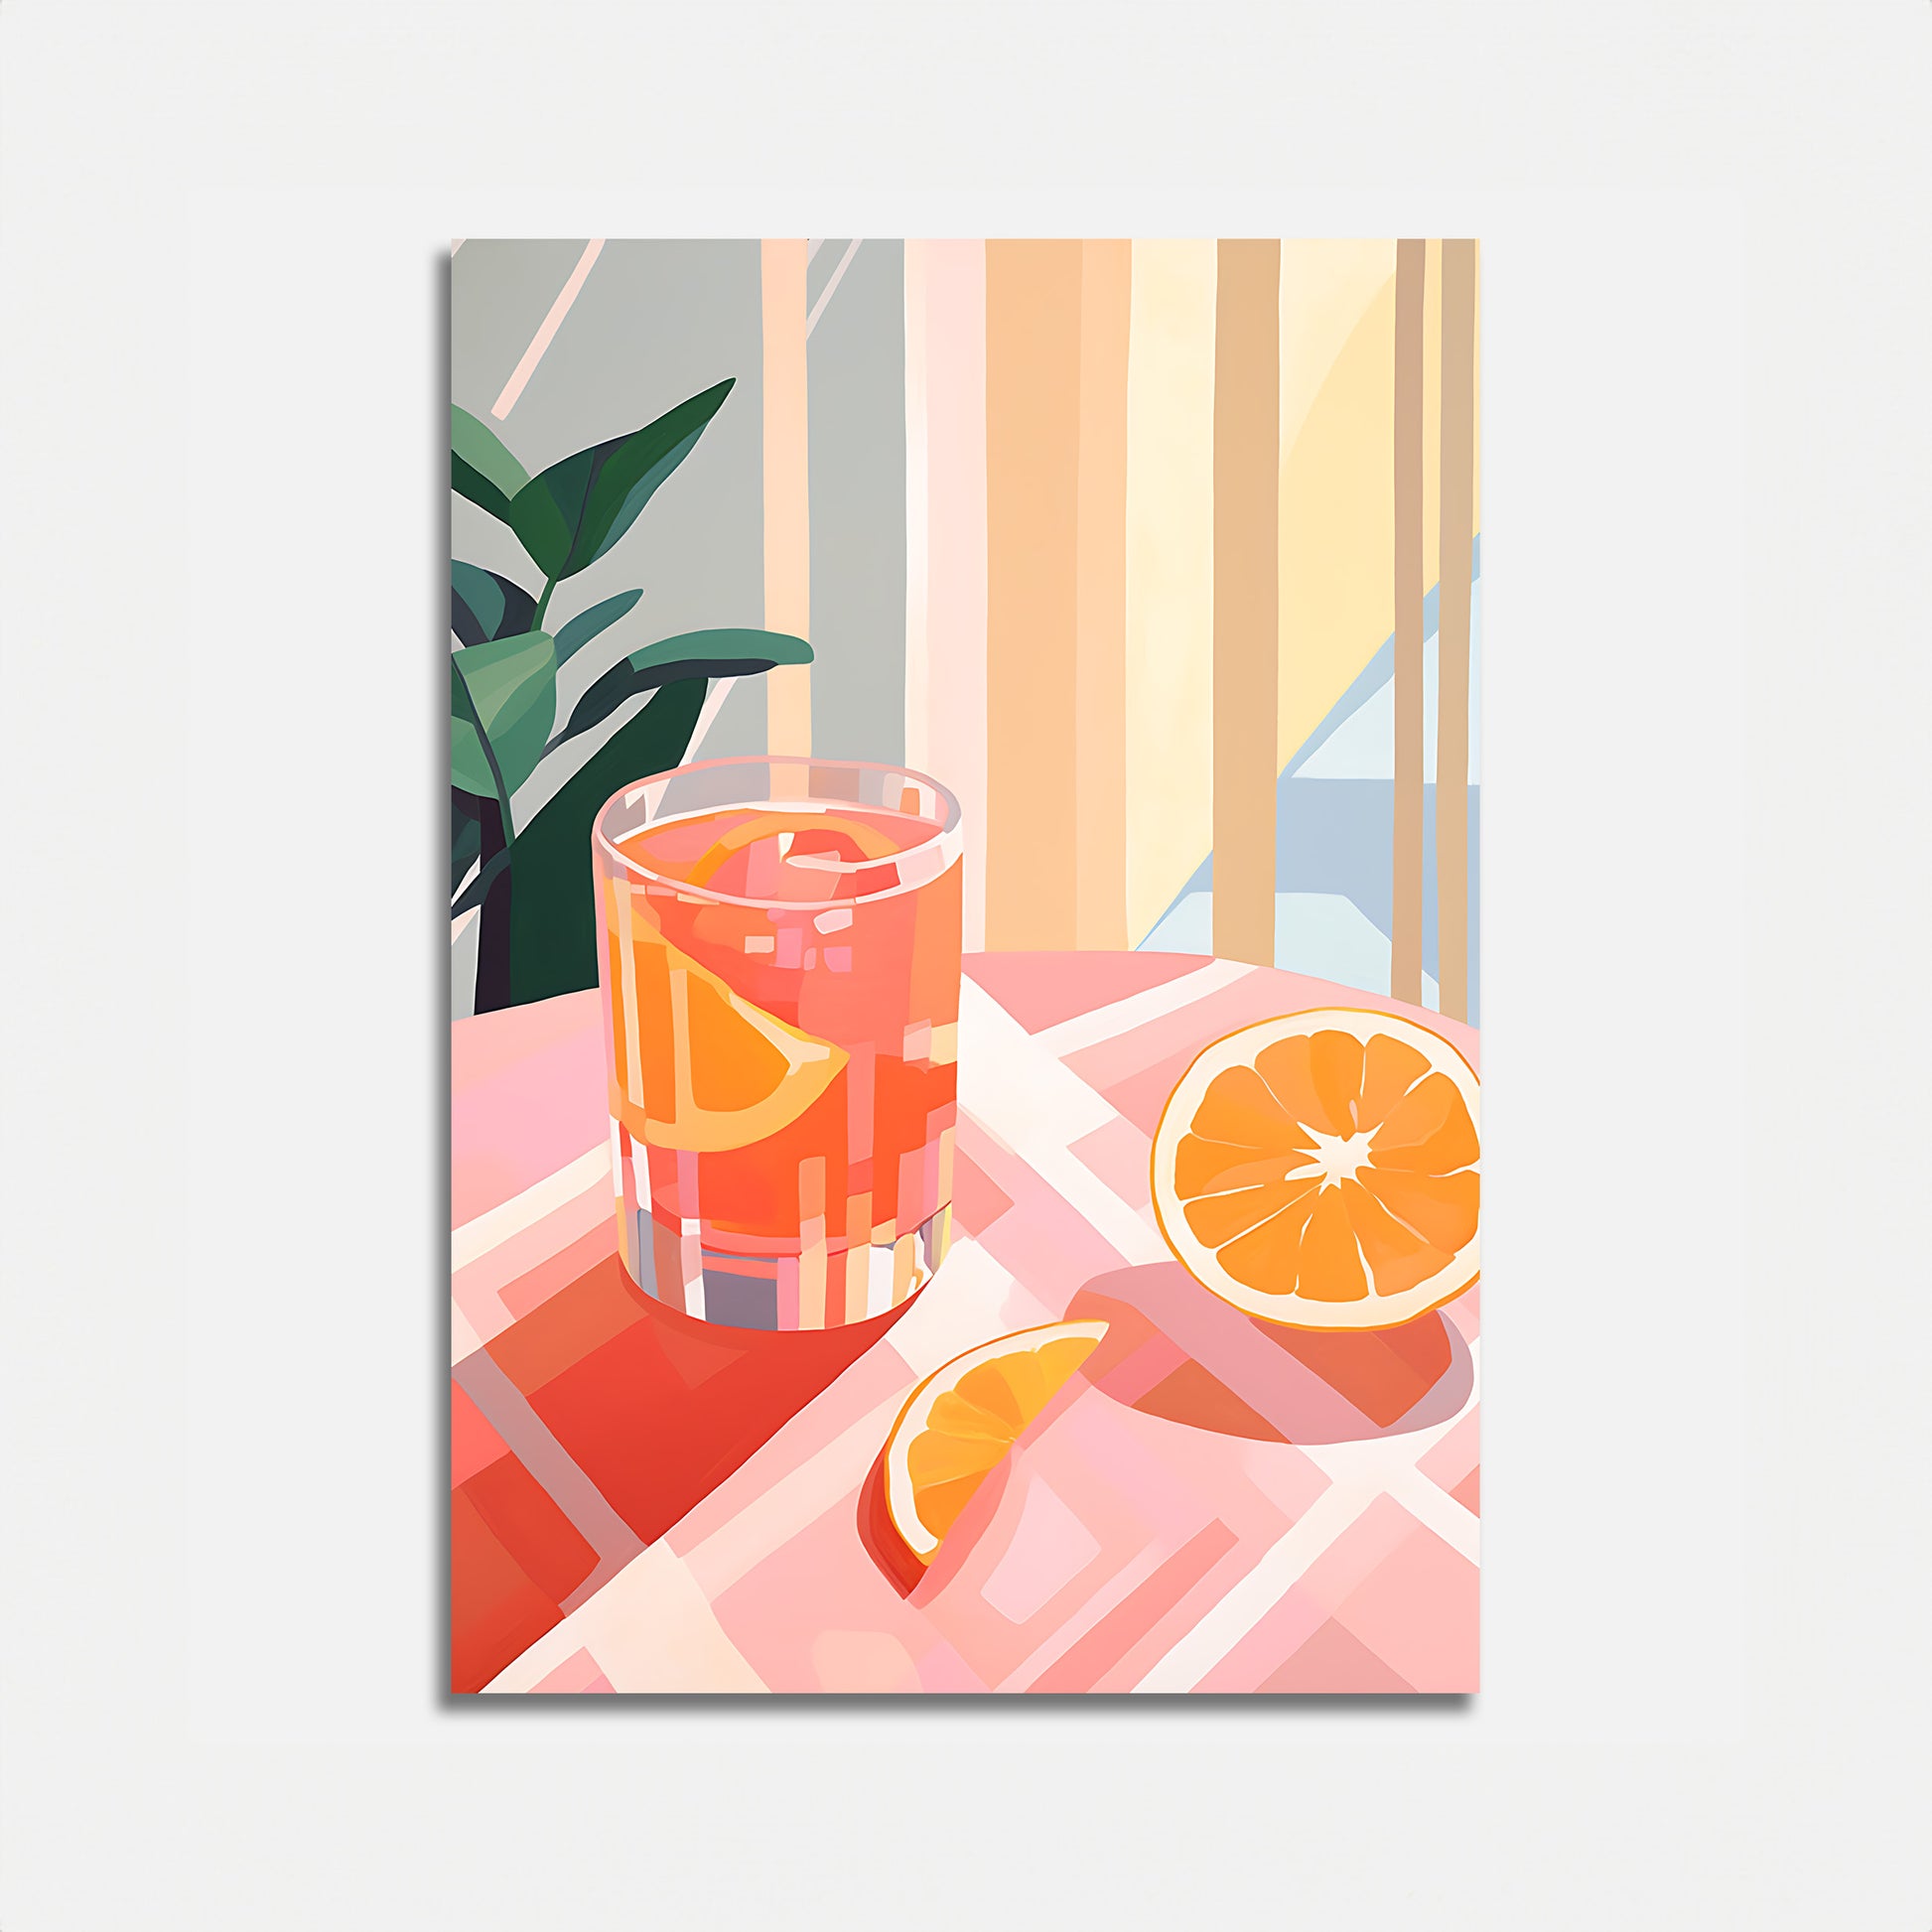 A stylized illustration of a glass of juice with sliced oranges on a table.